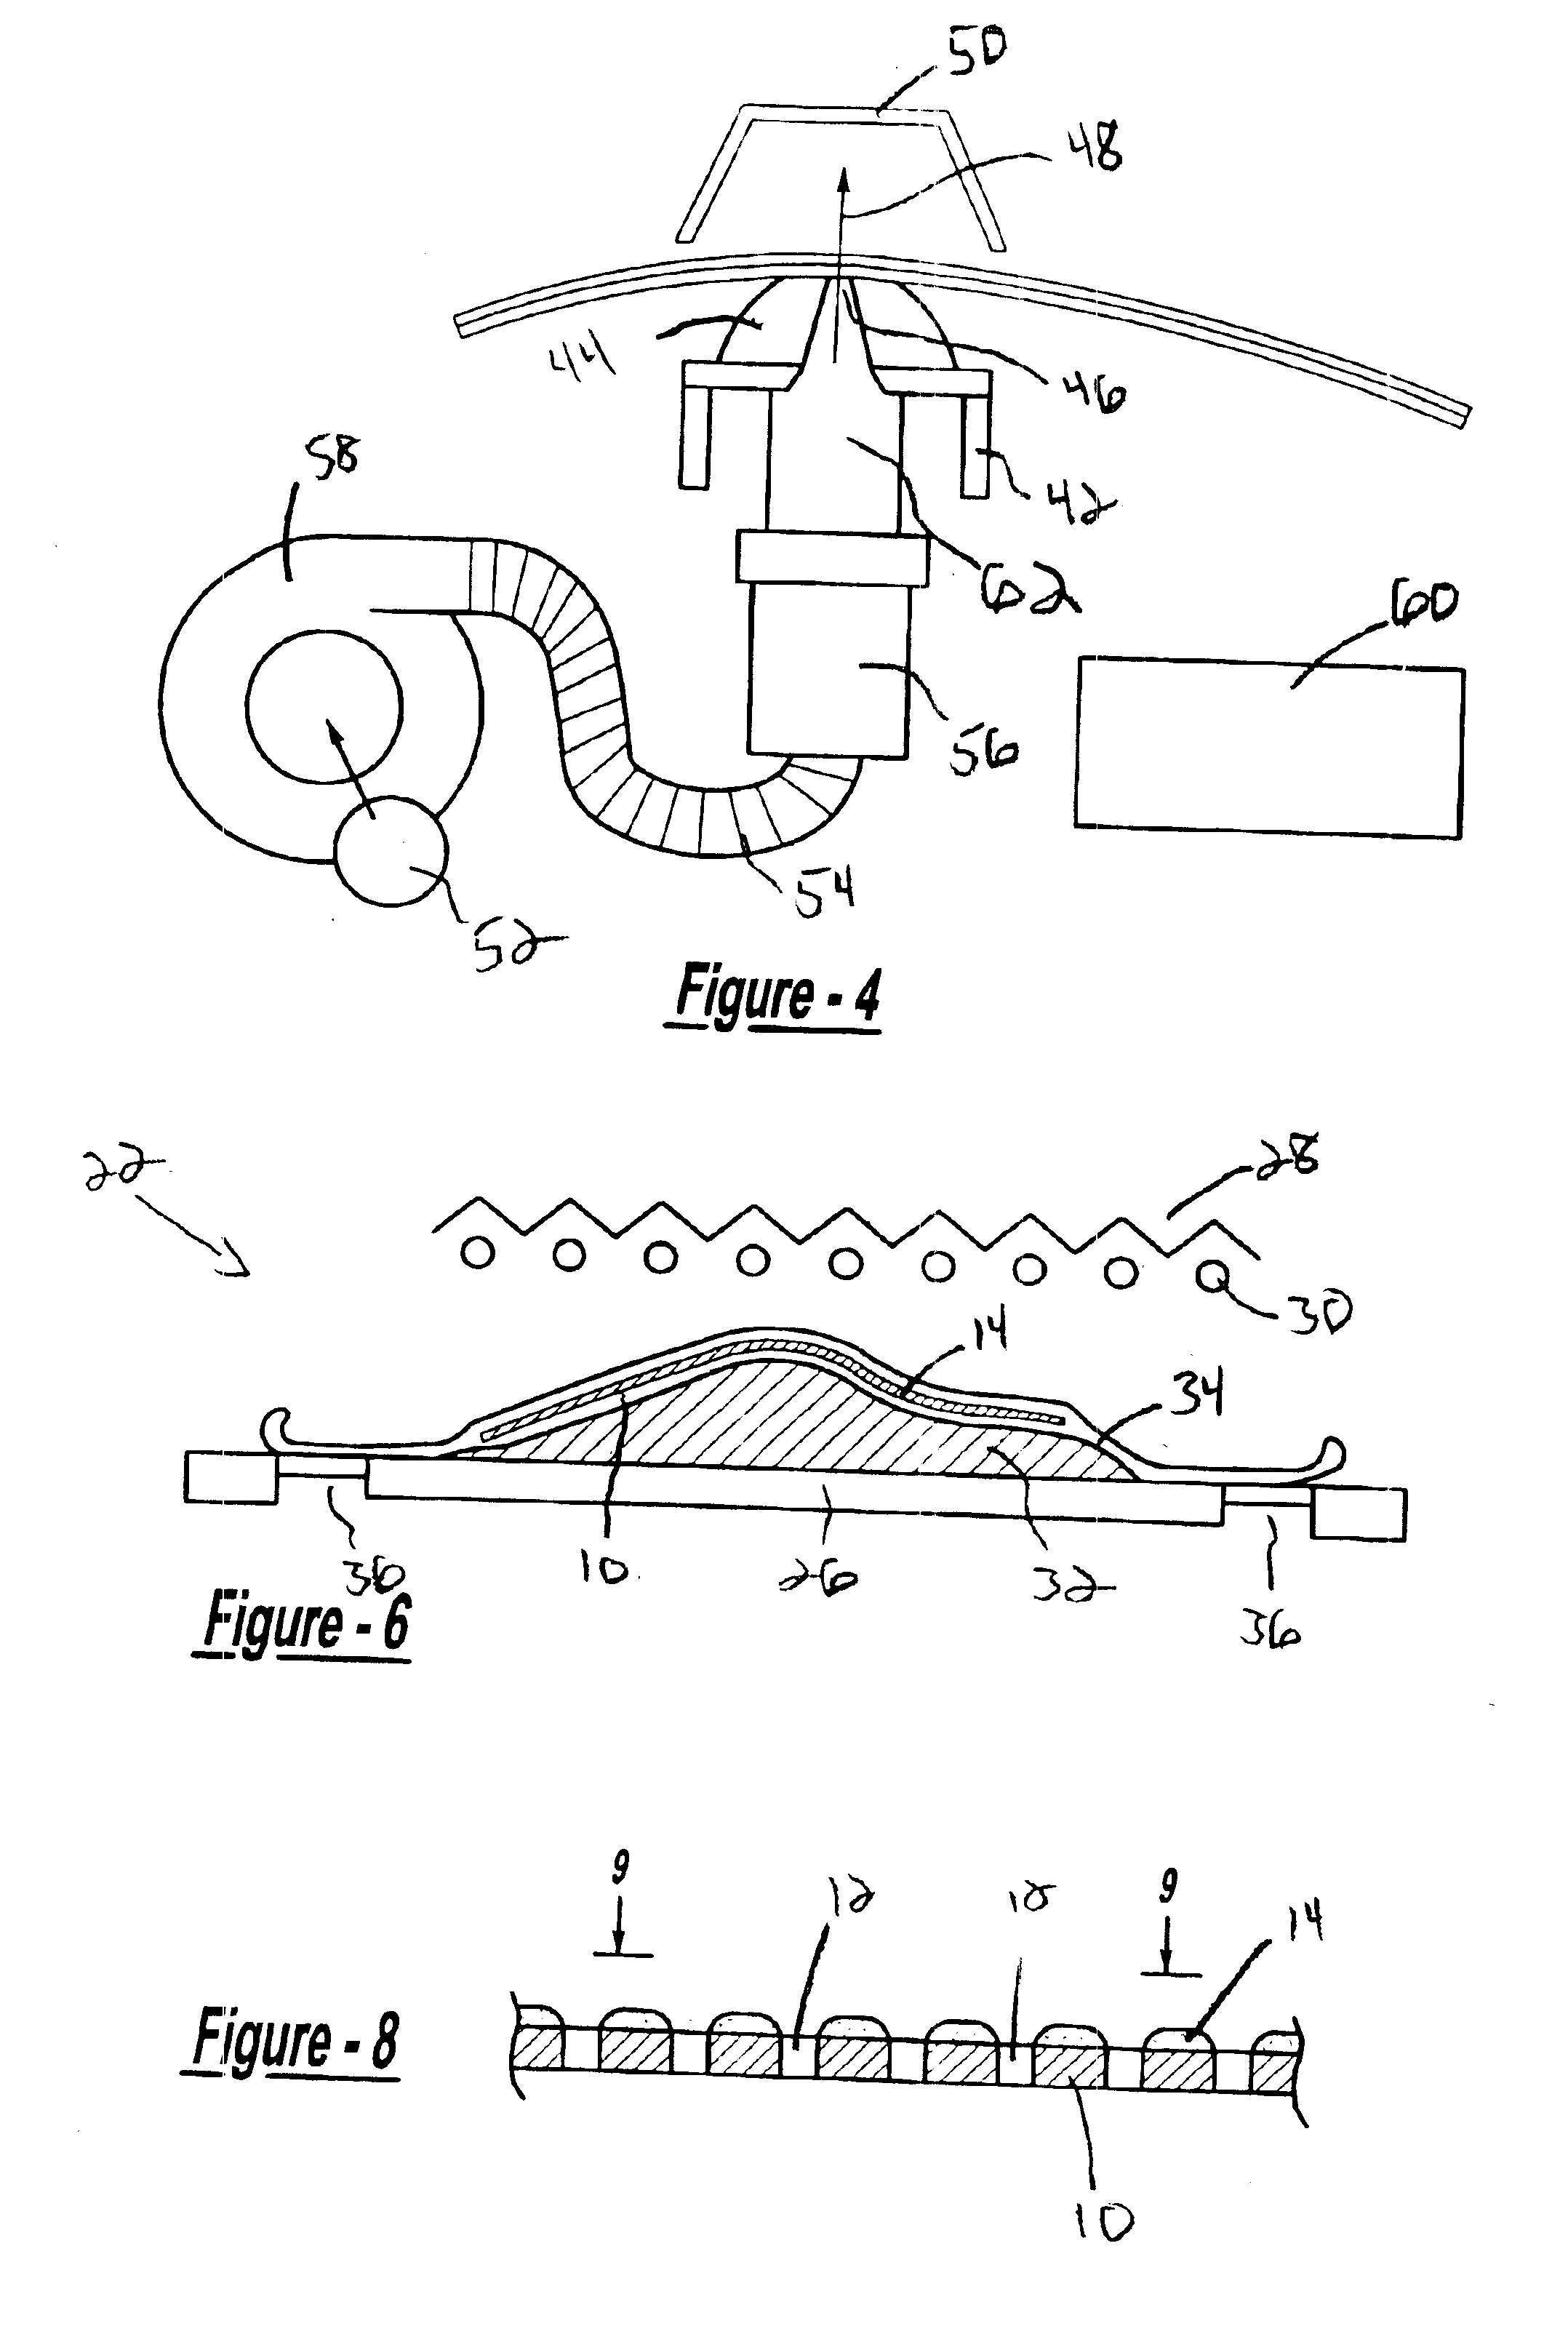 Method and apparatus for applying a film adhesive to a perforated panel